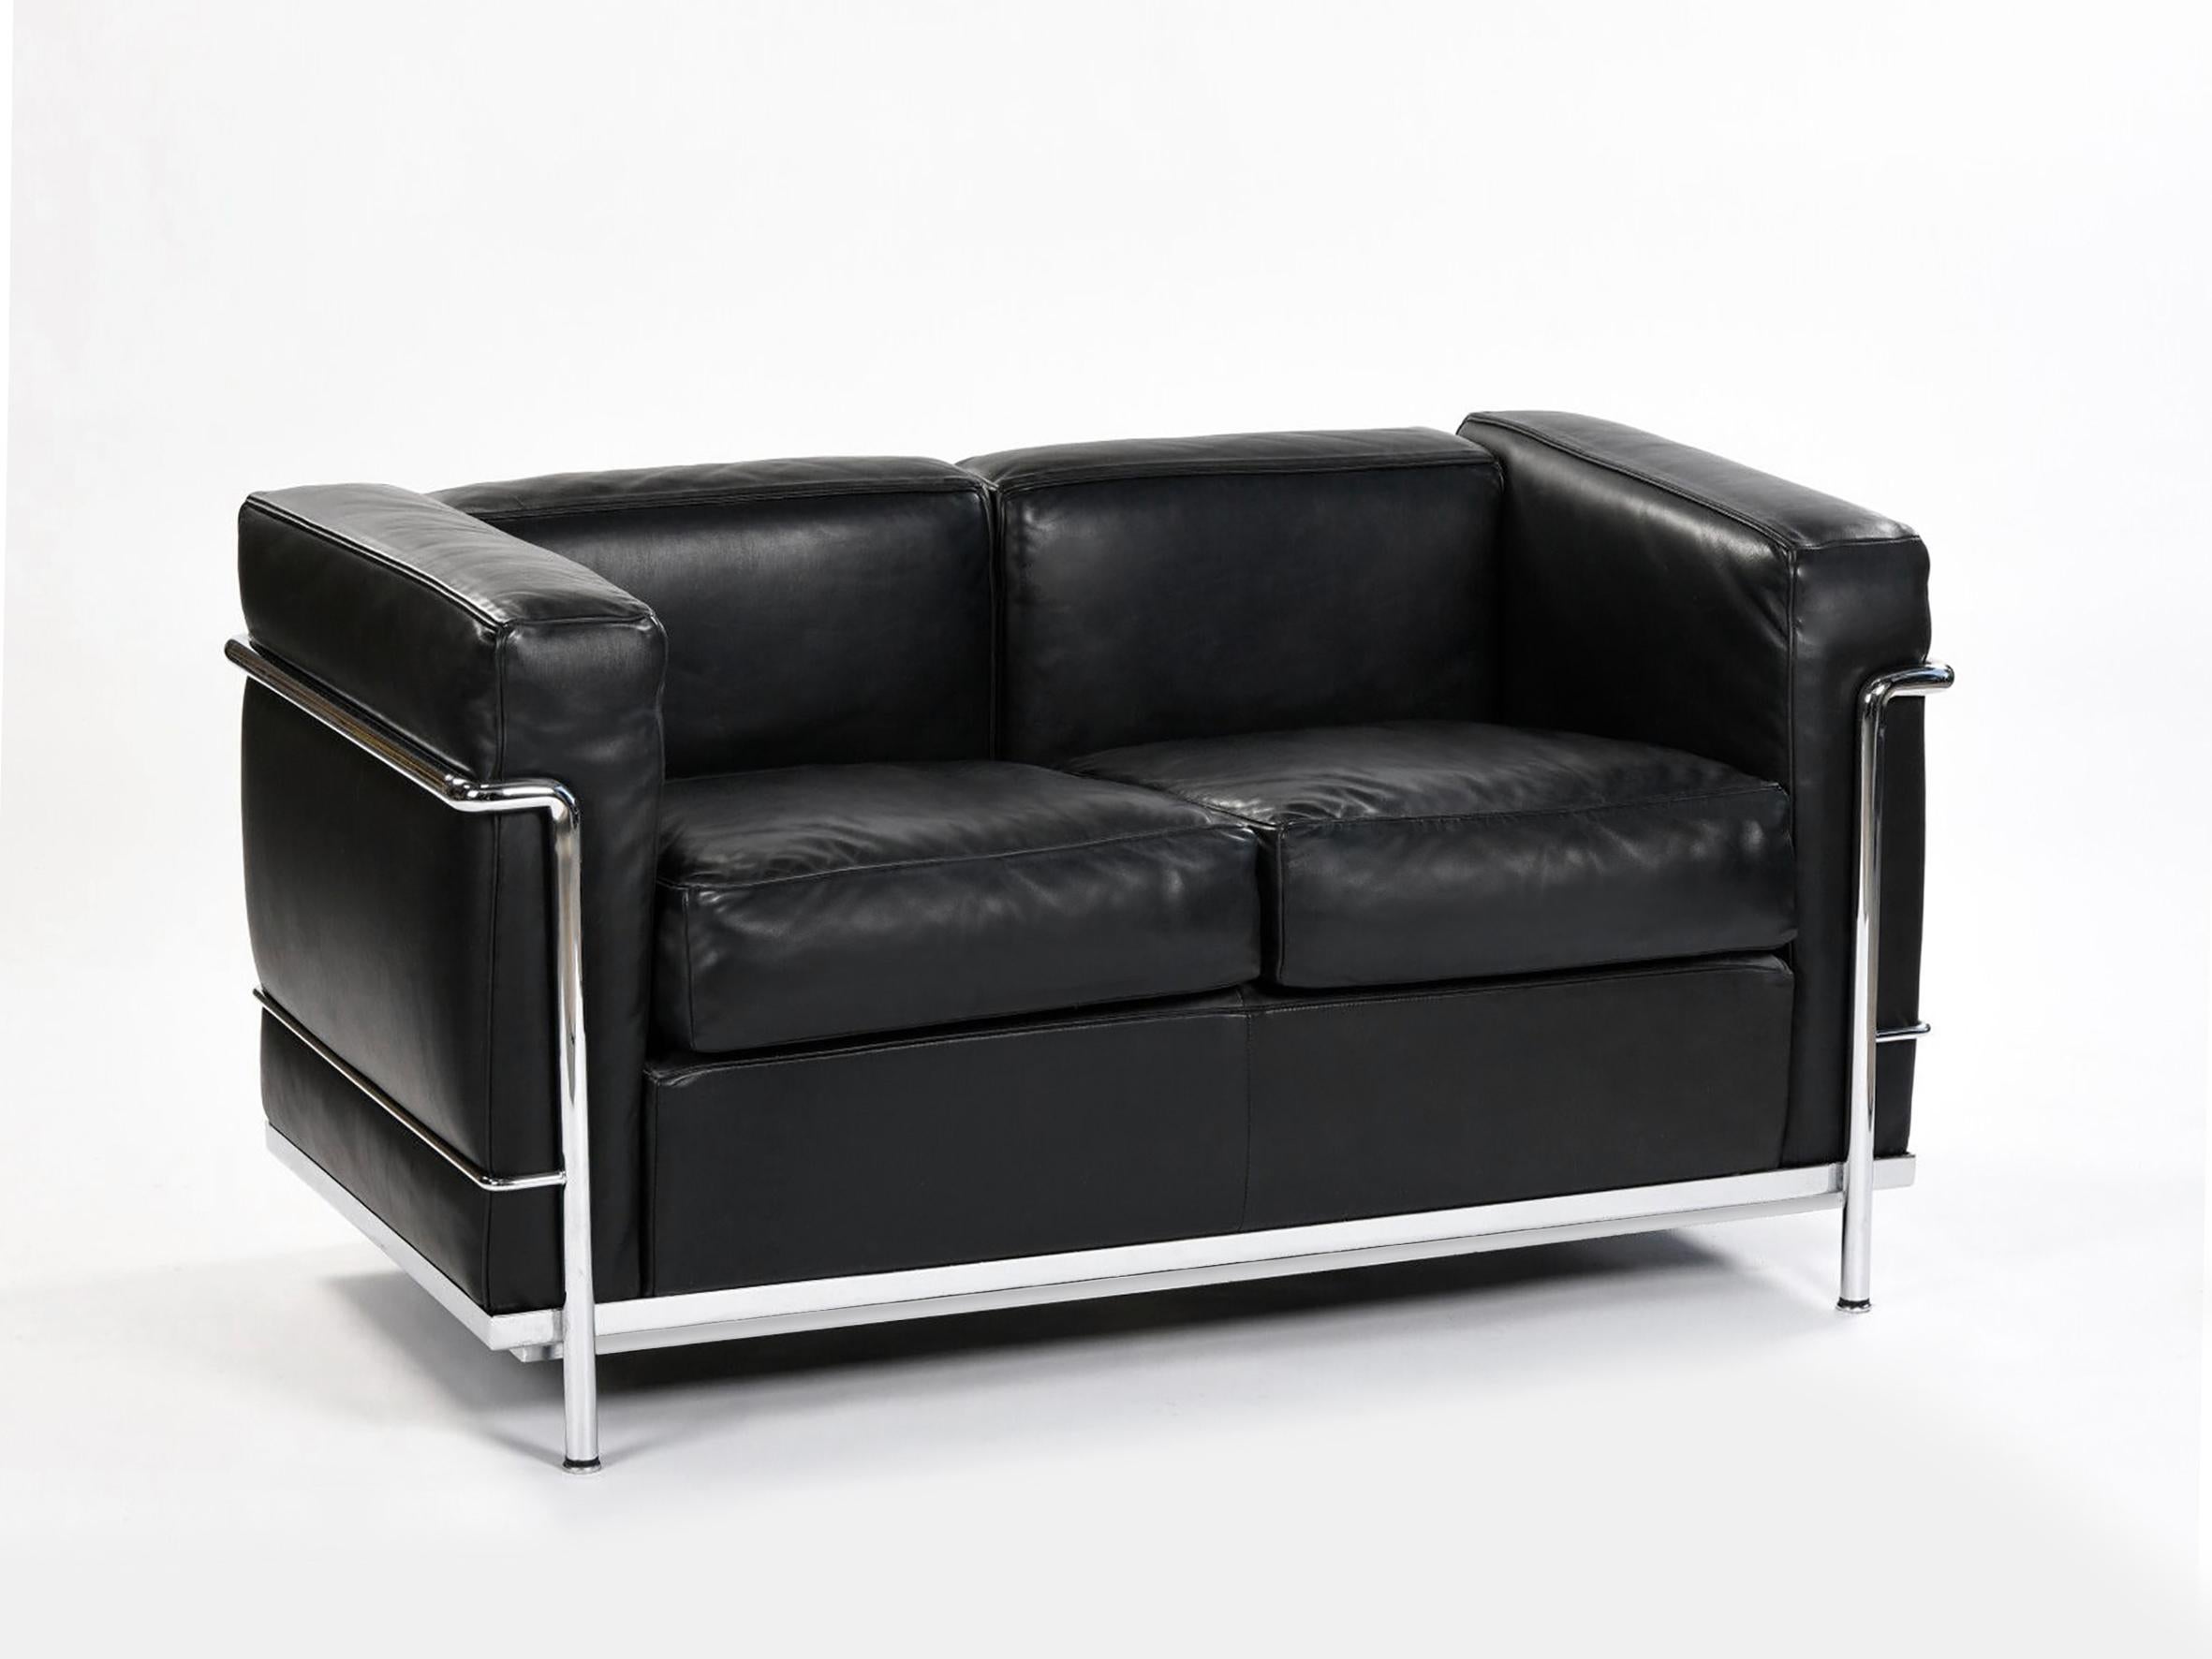 Authentic LC3 sofa, designed by Le Corbusier, Perriand and Jeanneret in 1928.
Cassina edition in black leather.
Engraved serial number and Cassina signature.

Very nice condition.

W 130 cm x D 70 cm x H 69 cm 

Retail price : 9579€